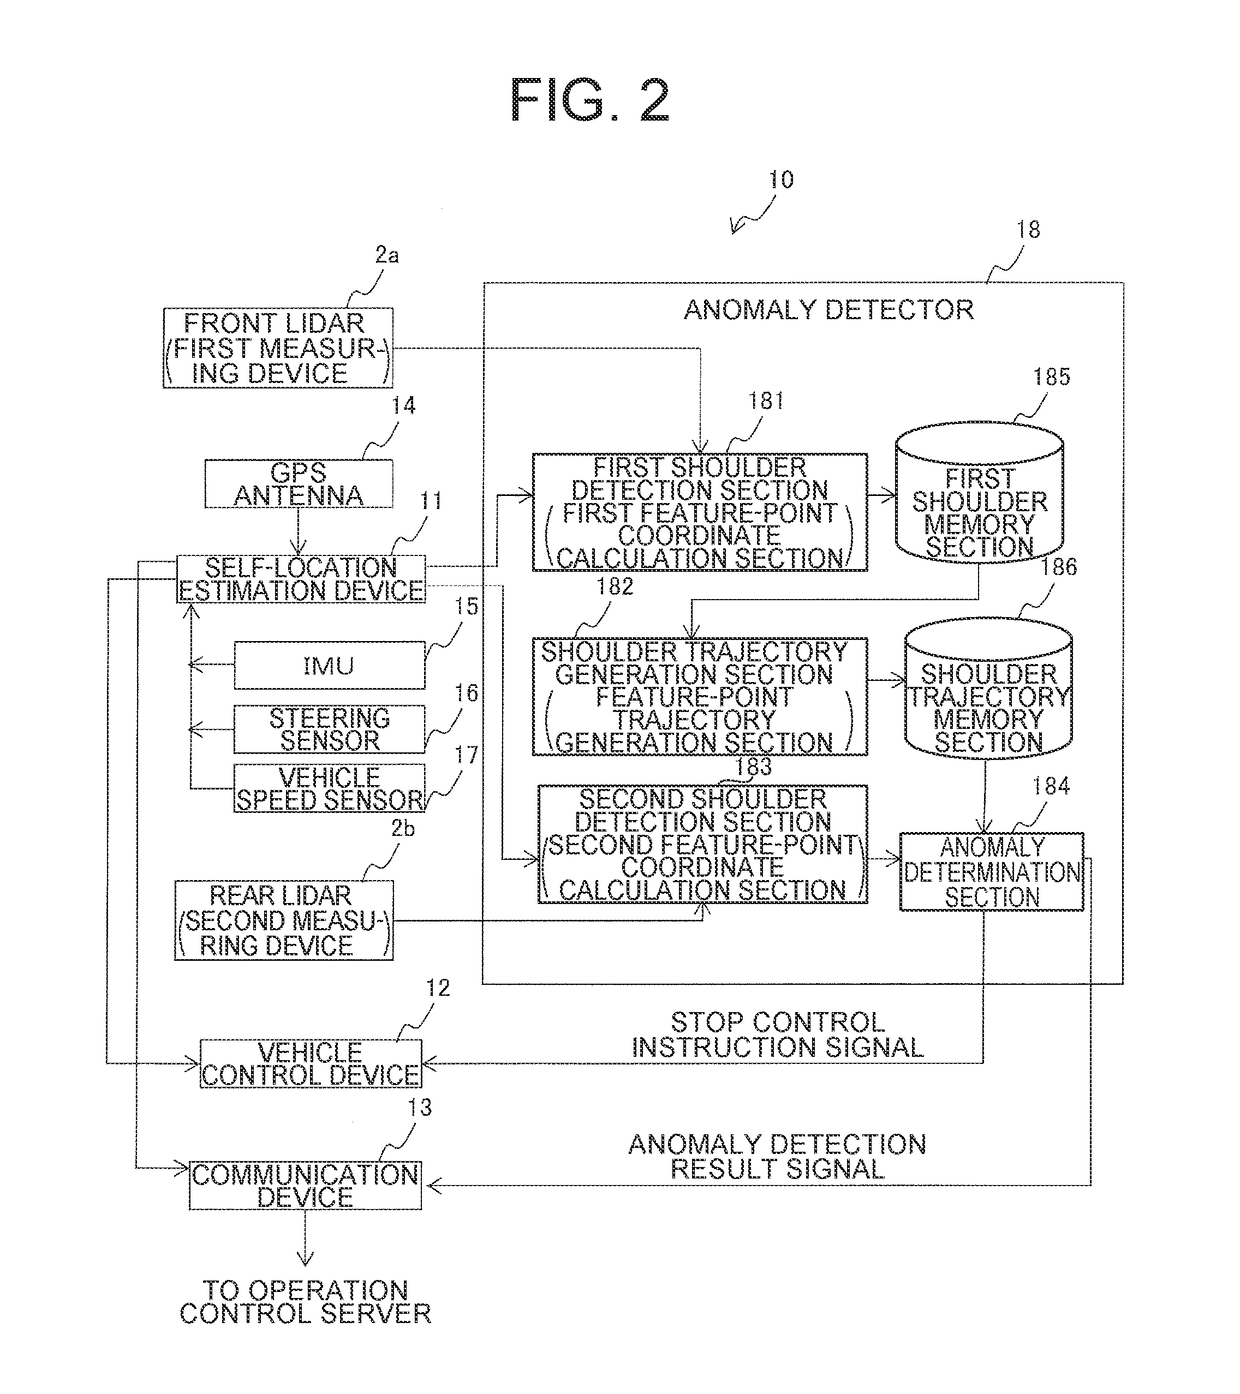 Anomaly detector for self-location estimation device and vehicle